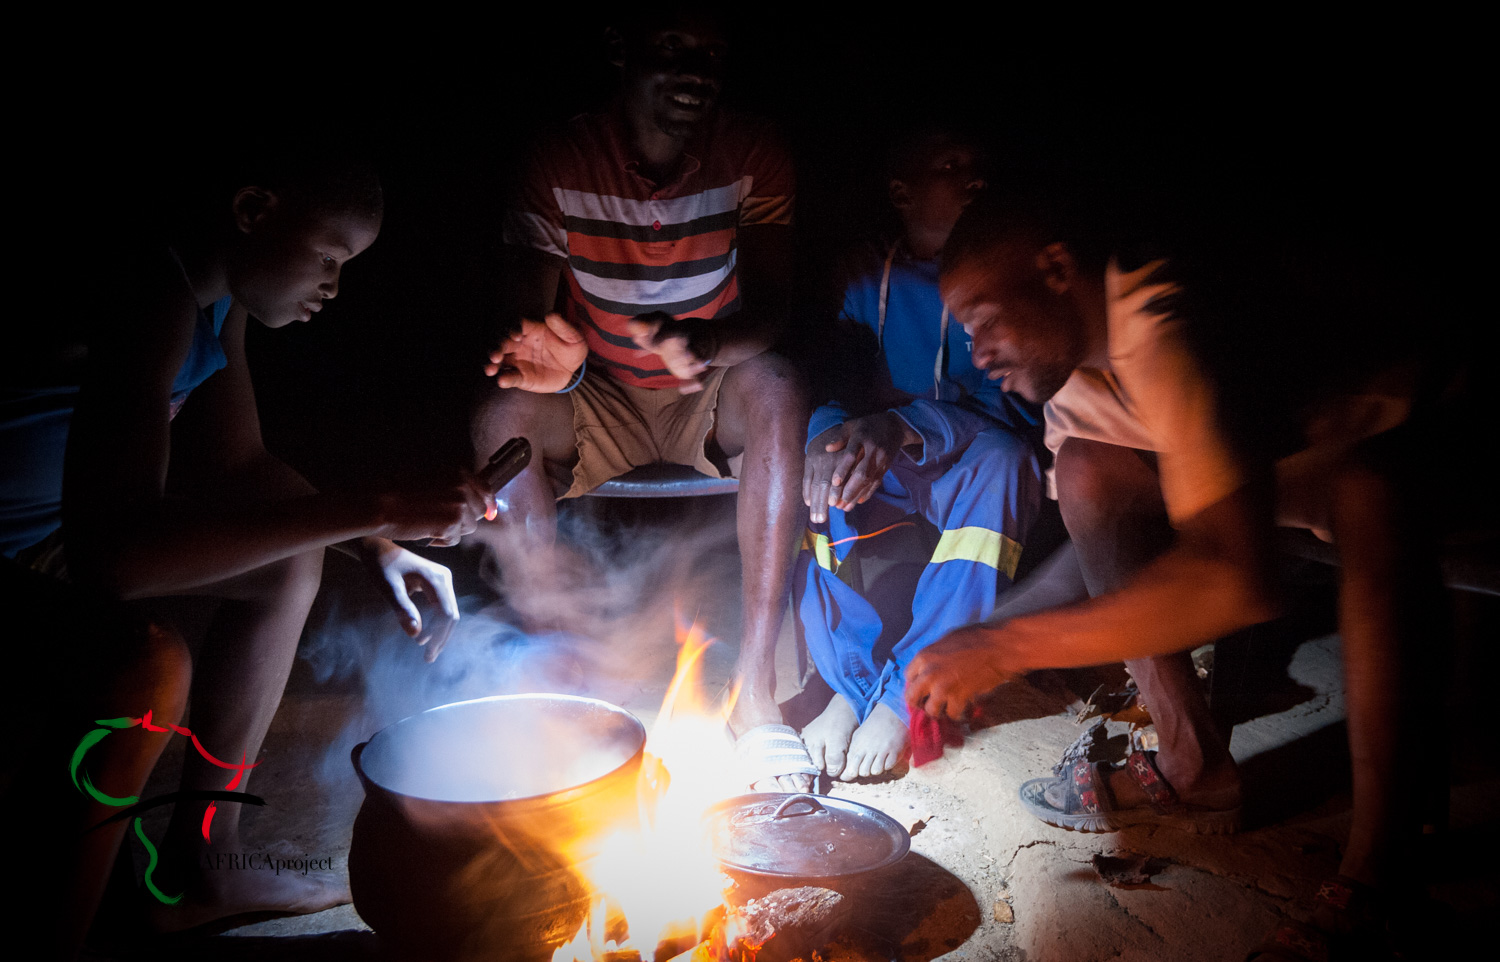 Men from the Herero Tribe cooking with an open flame.